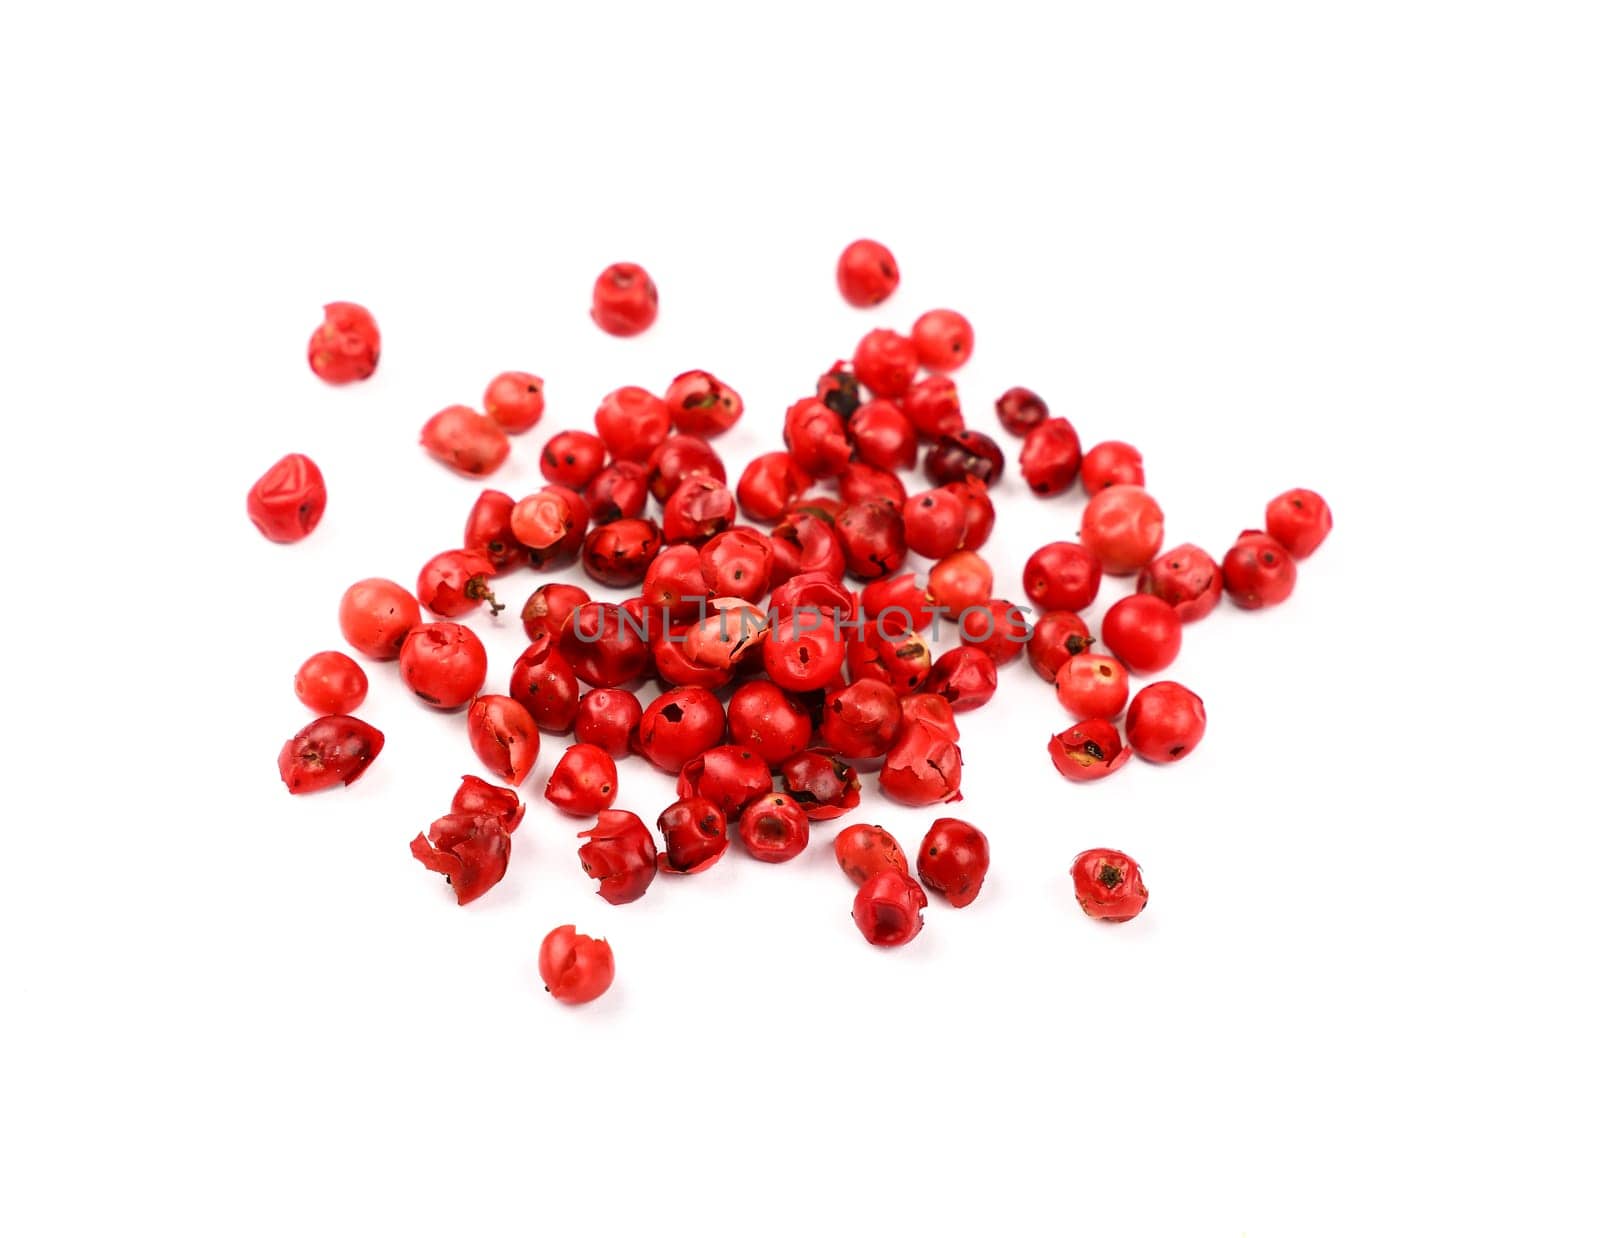 Close up heap of red pink pepper peppercorns spilled and spread around isolated on white background, high angle view